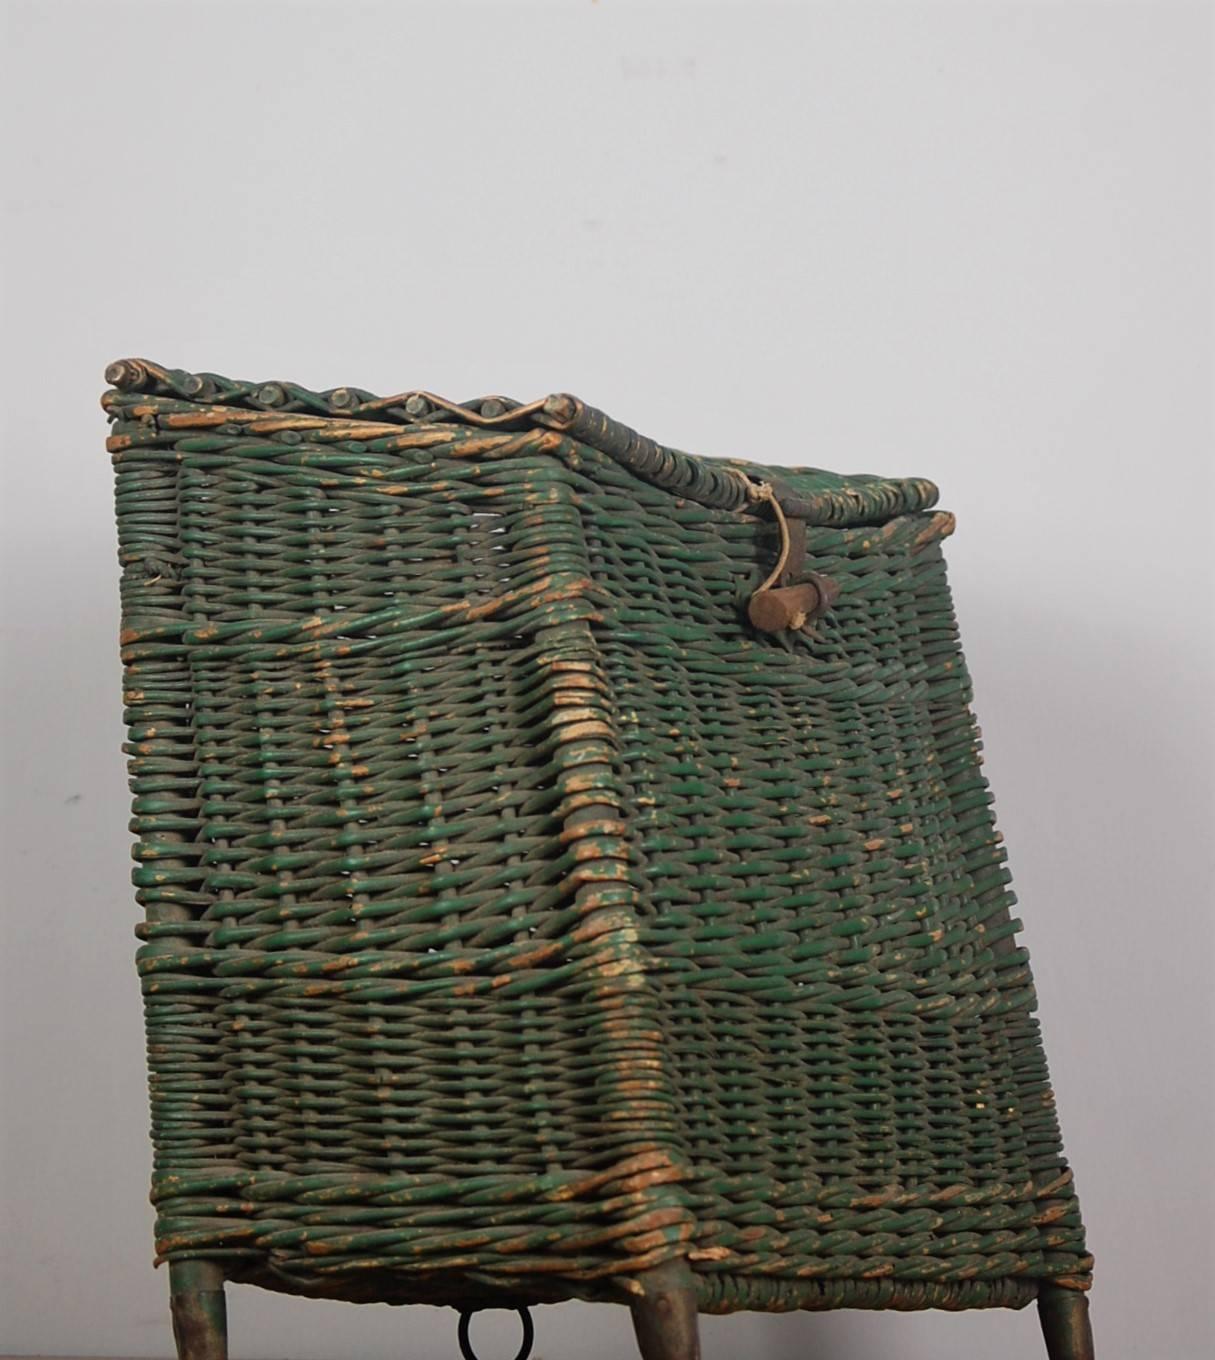 Wicker Fishing Creel In Excellent Condition In Pease pottage, West Sussex